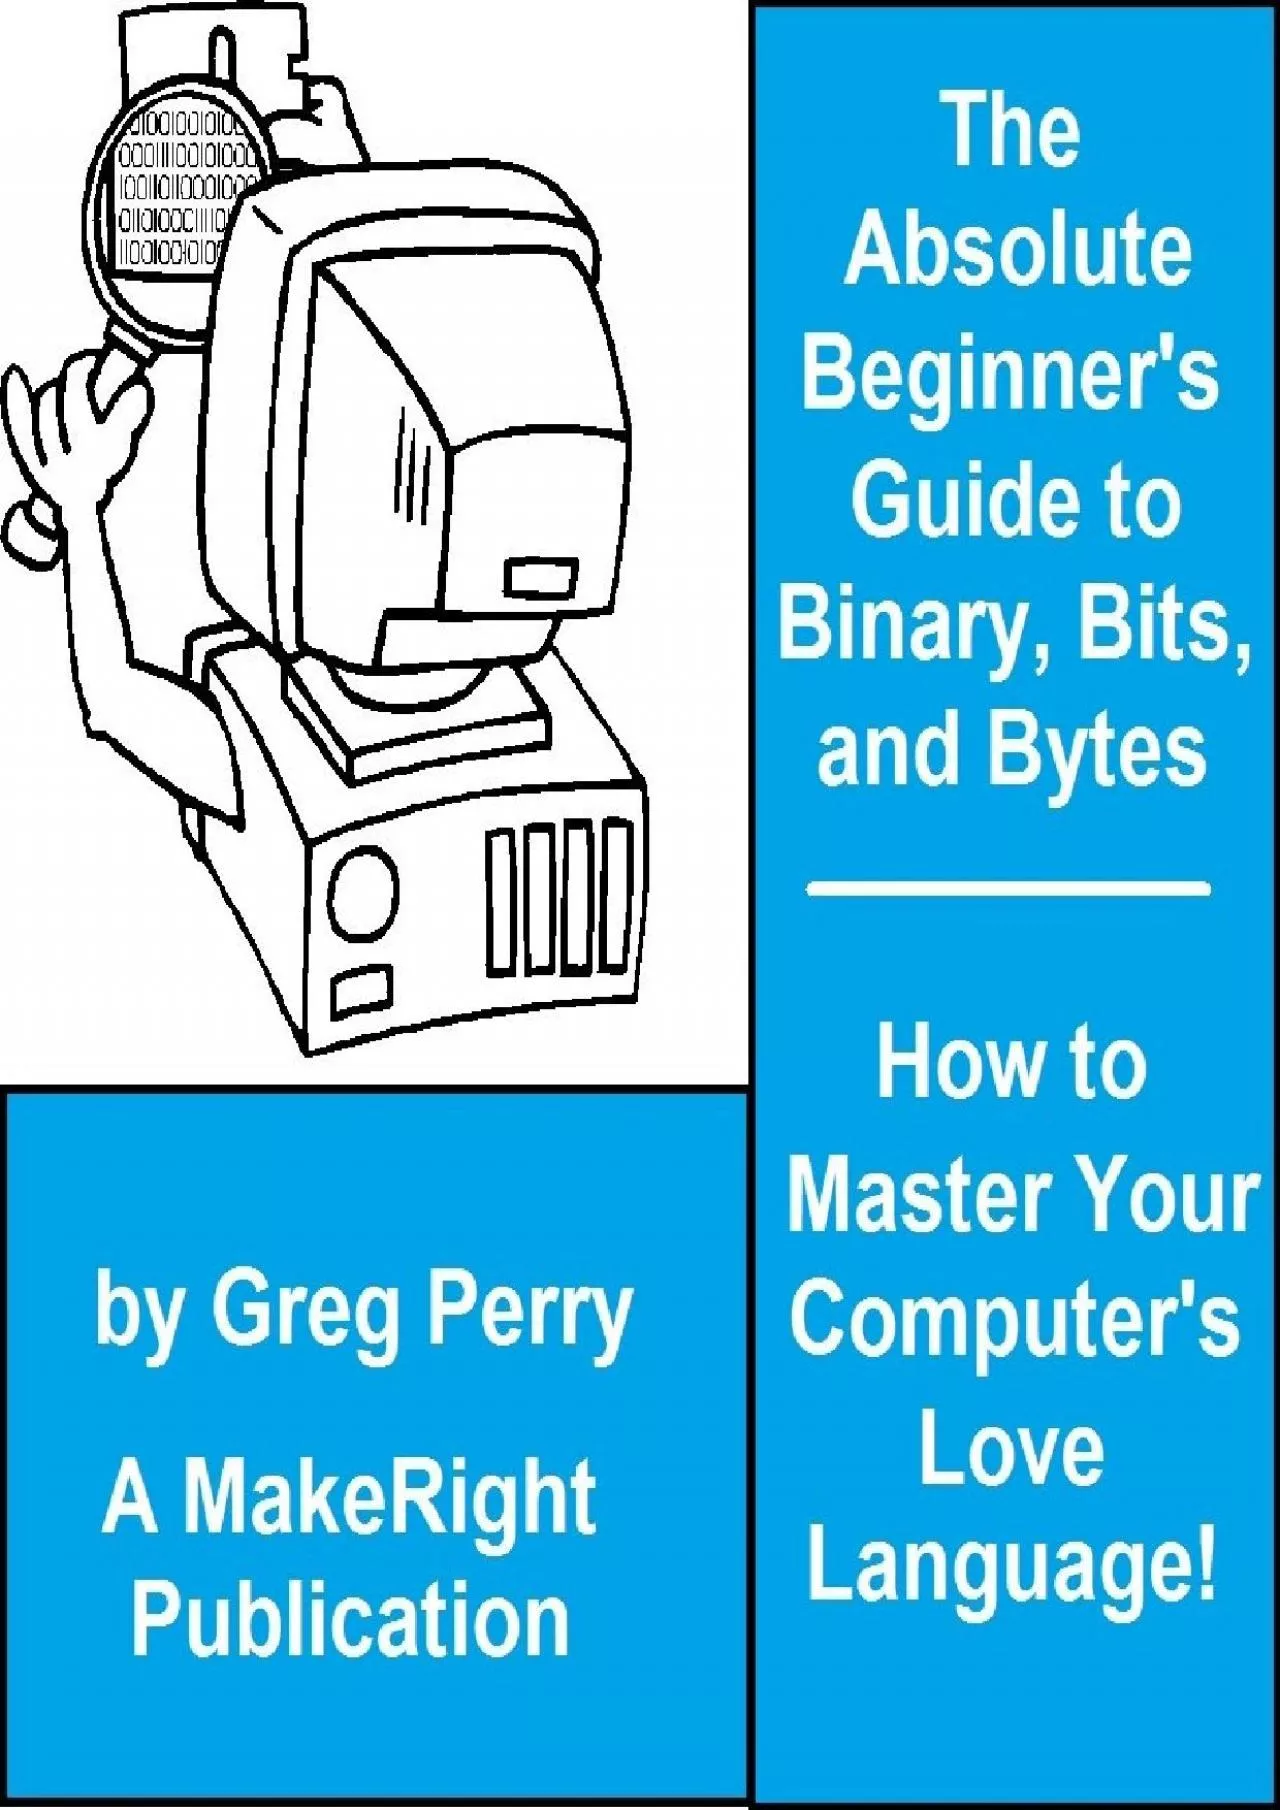 [FREE]-The Absolute Beginner\'s Guide to Binary, Hex, Bits, and Bytes! How to Master Your